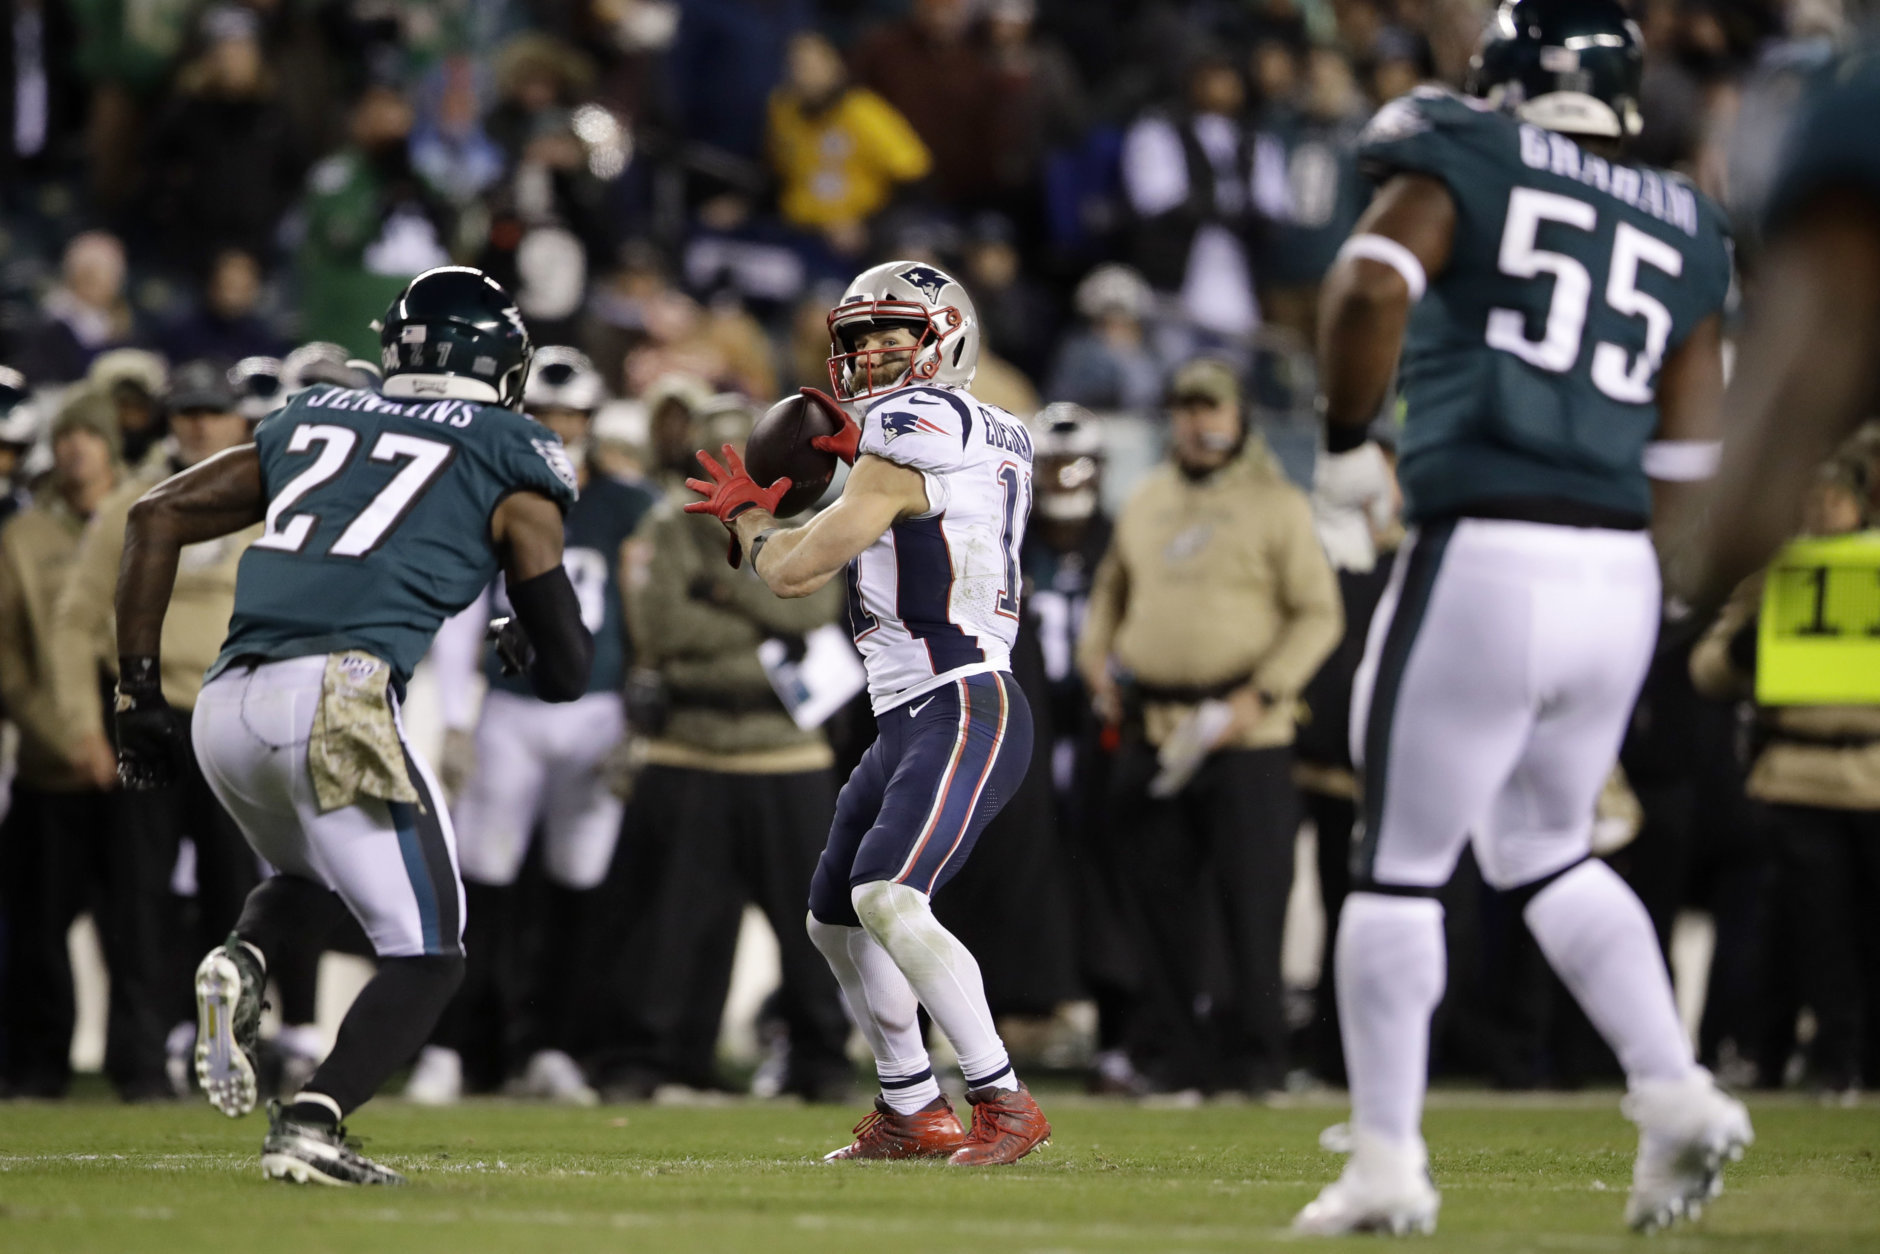 <p><b><i>Patriots 17</i></b><br />
<b><i>Eagles 10</i></b></p>
<p>Even on <a href="https://twitter.com/ESPNStatsInfo/status/1196227448351932416?s=20" target="_blank" rel="noopener" data-saferedirecturl="https://www.google.com/url?q=https://twitter.com/ESPNStatsInfo/status/1196227448351932416?s%3D20&amp;source=gmail&amp;ust=1574133264451000&amp;usg=AFQjCNFs6KMGT-WeZKbHzthRjd6q95Vp6g">the first day Tom Brady wasn&#8217;t New England&#8217;s best passer</a>, the Patriots won a tough road game to somewhat avenge their last Super Bowl loss. It just feels like New England and Baltimore are on a collision course for a rematch for the AFC Championship.</p>
